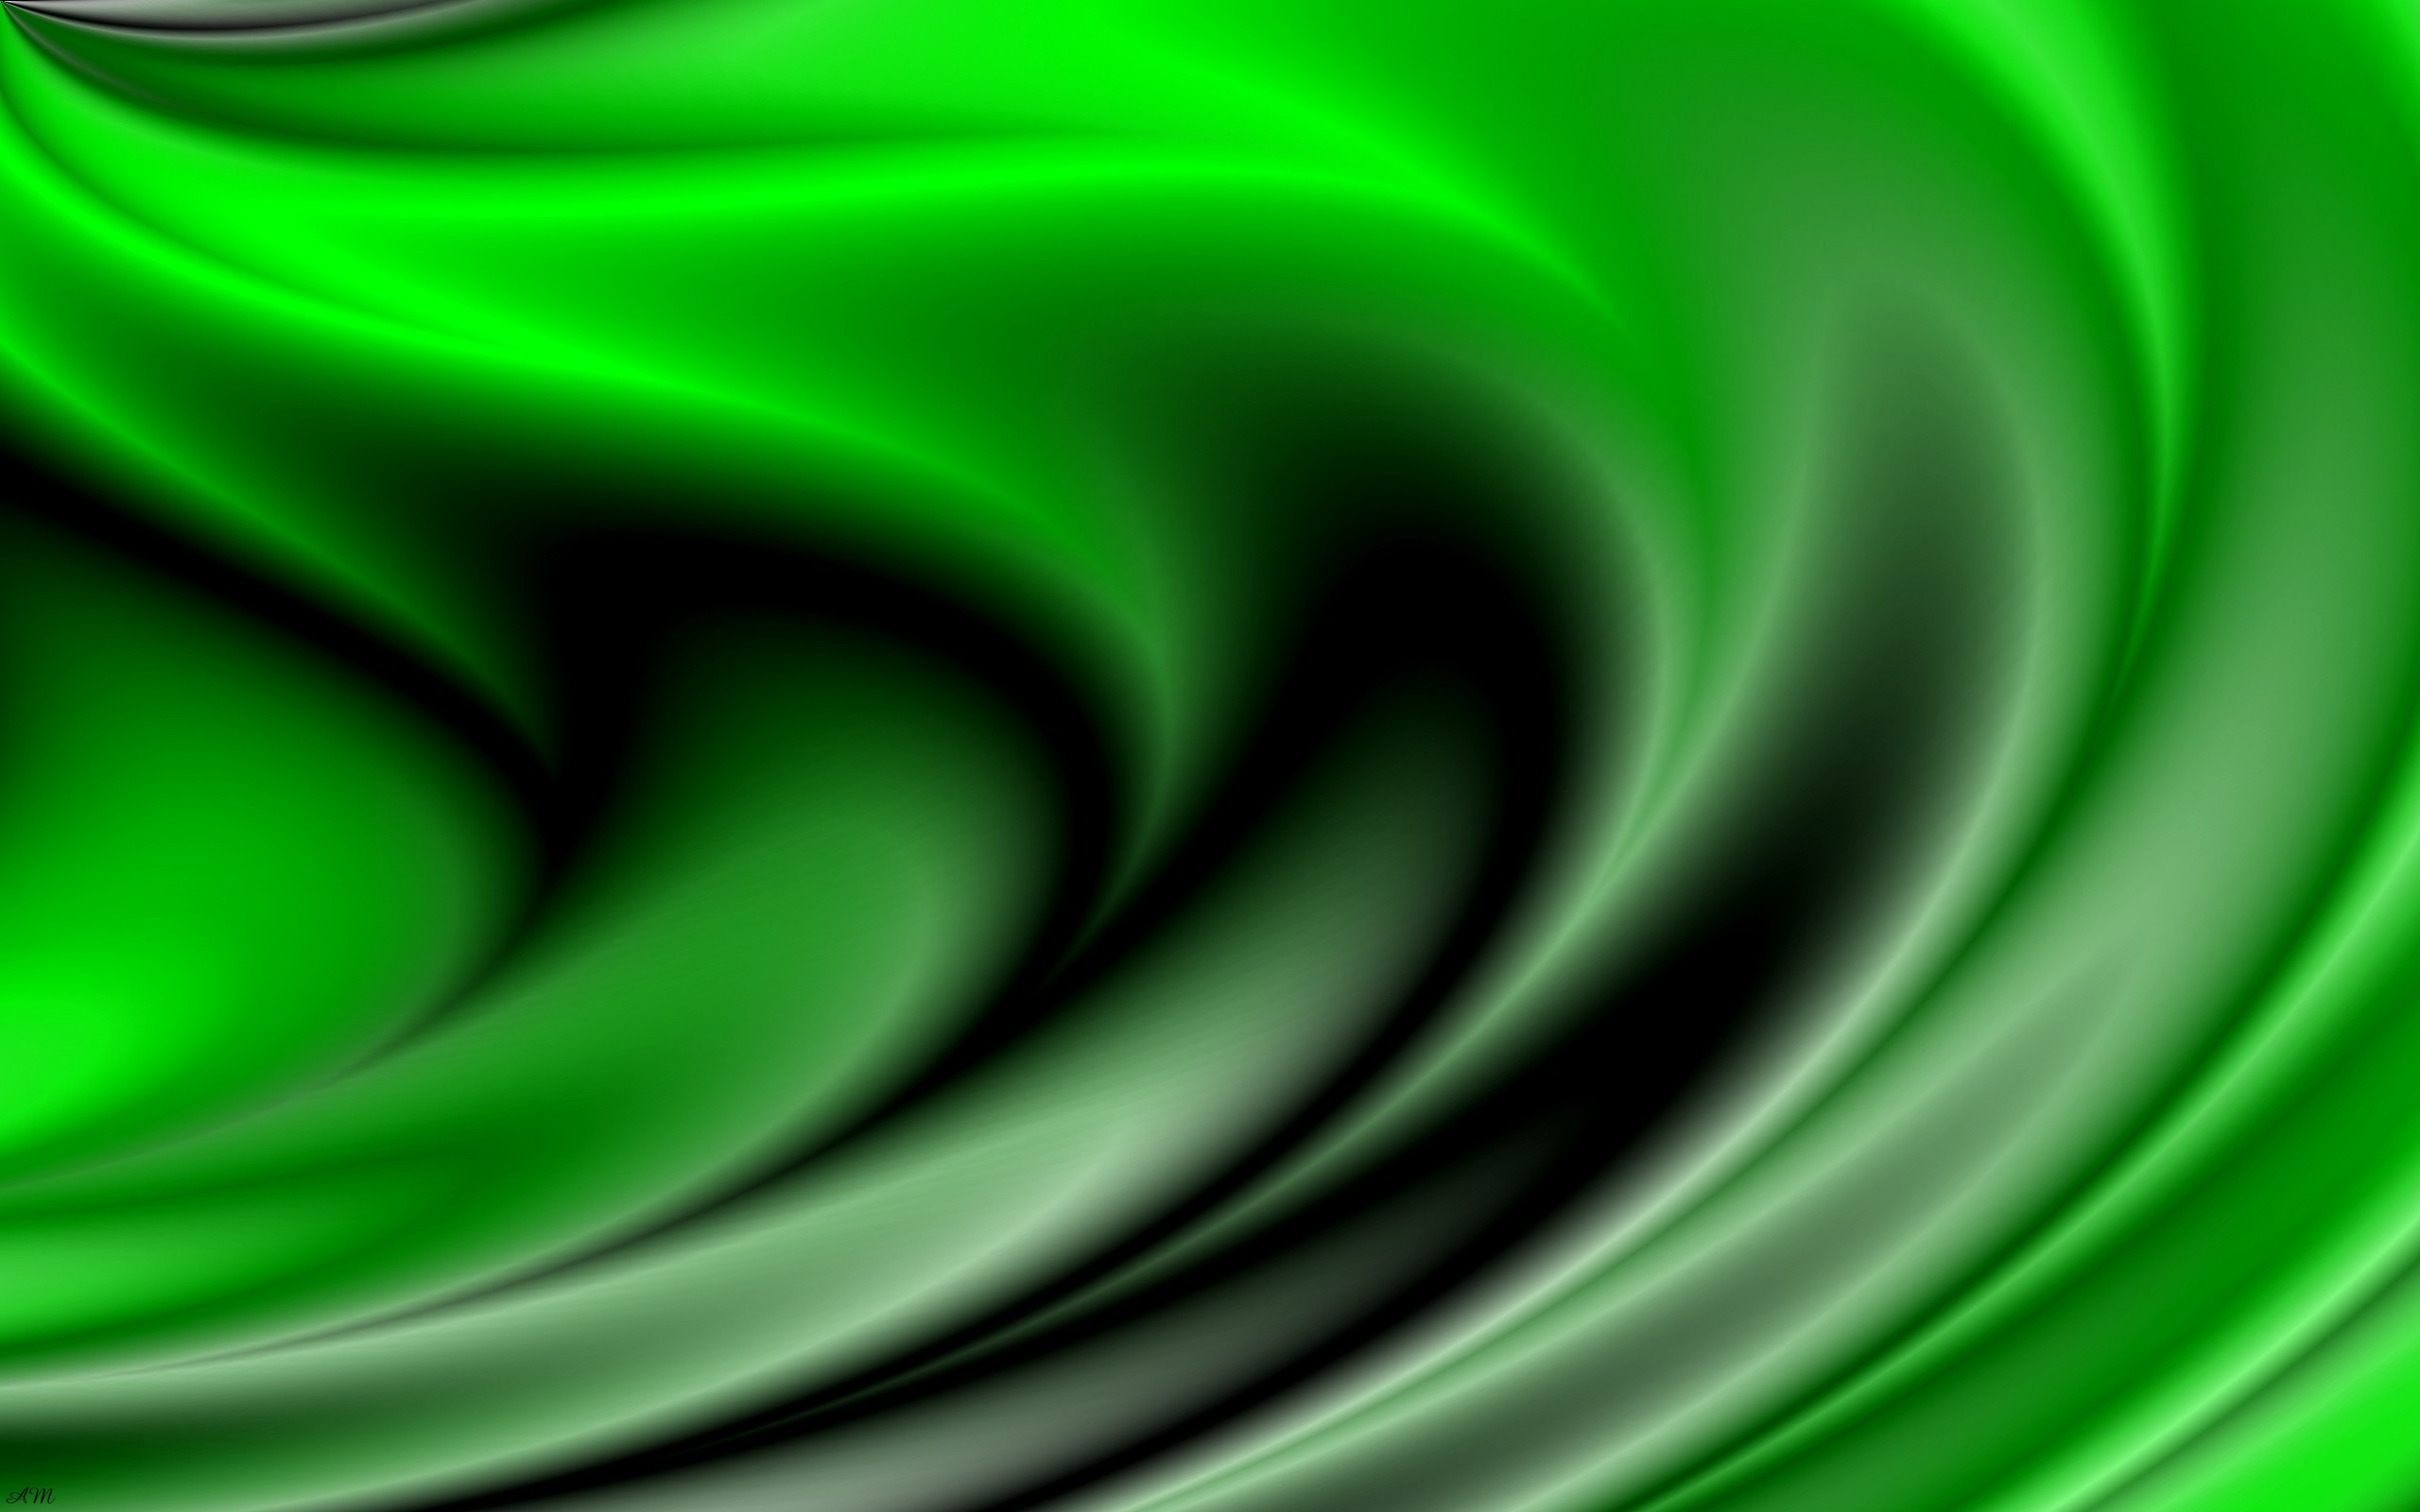 fashionewallpaper.blogspot.com: Abstract Green Background 